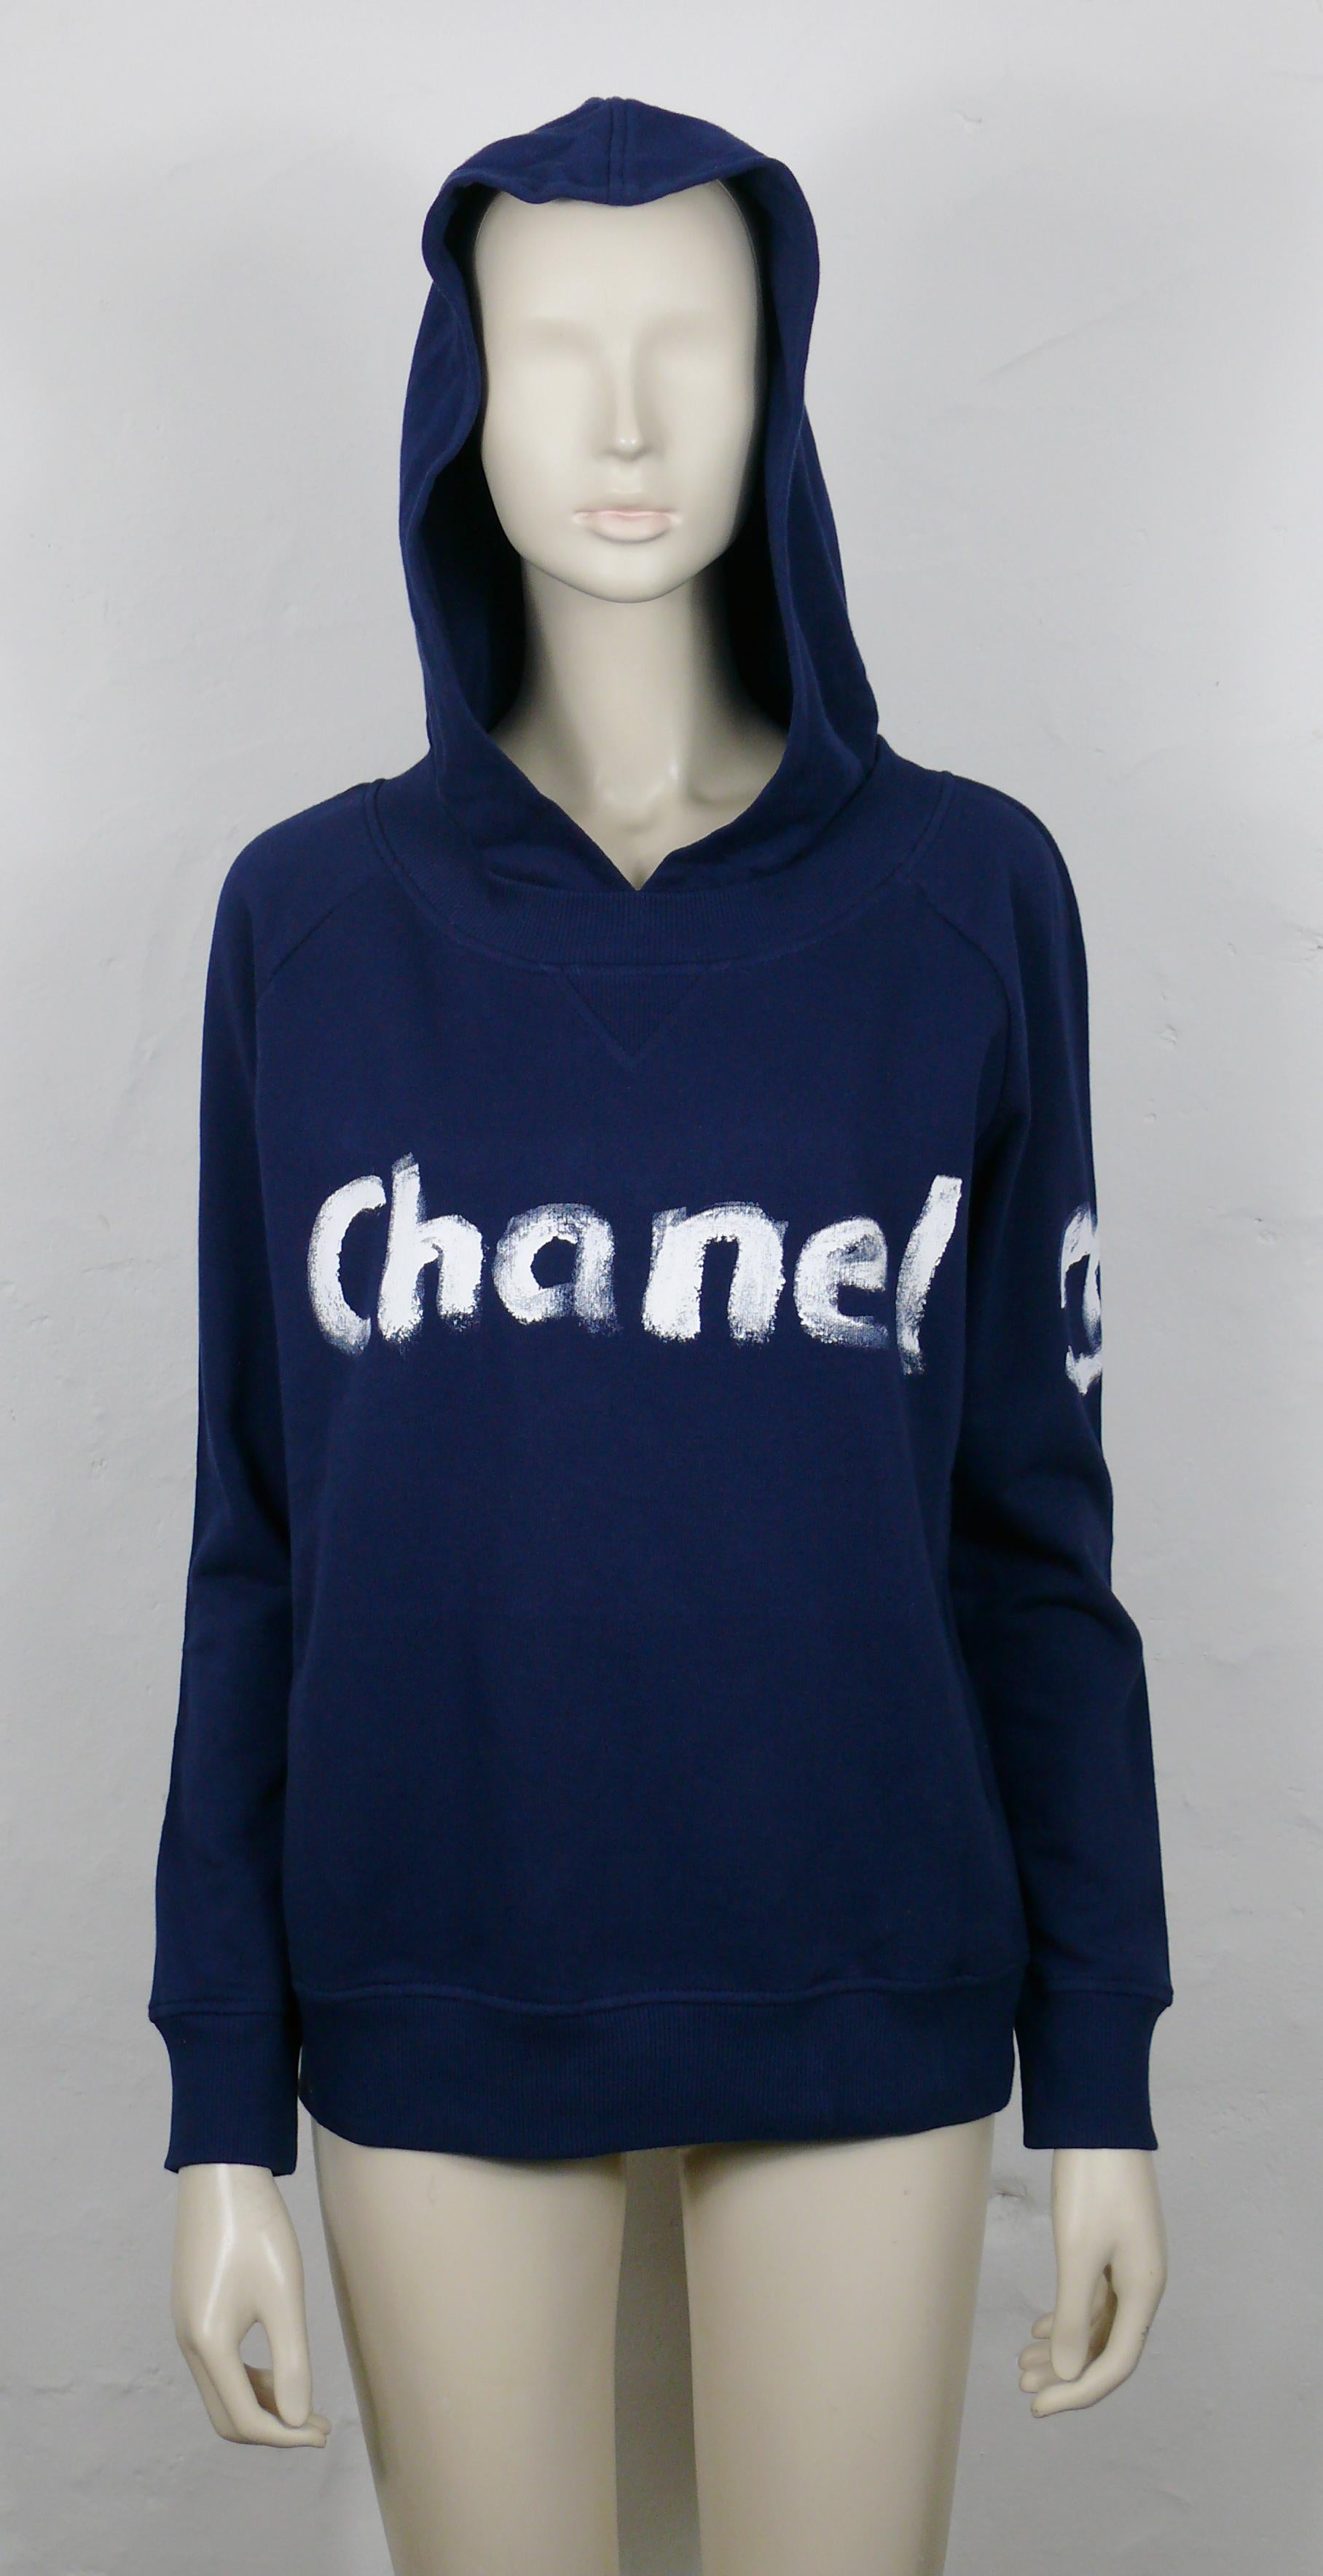 CHANEL Christmas 2013 VIPs Limited Edition Hooded Cotton Sweatshirt Size M In Excellent Condition For Sale In Nice, FR